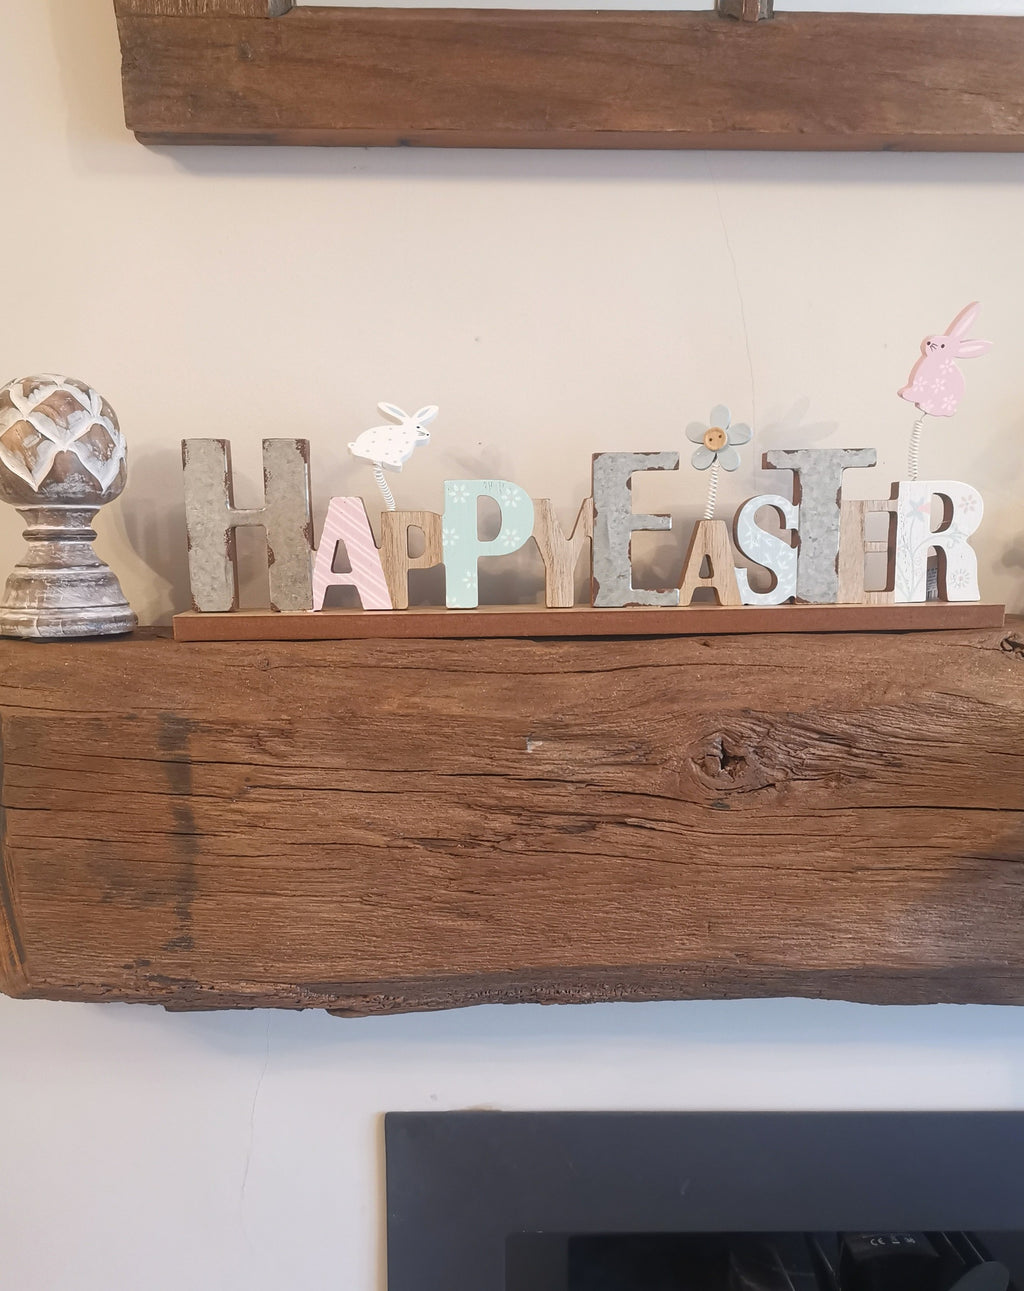 Happy Easter Wooden Sign - The Burrow Interiors